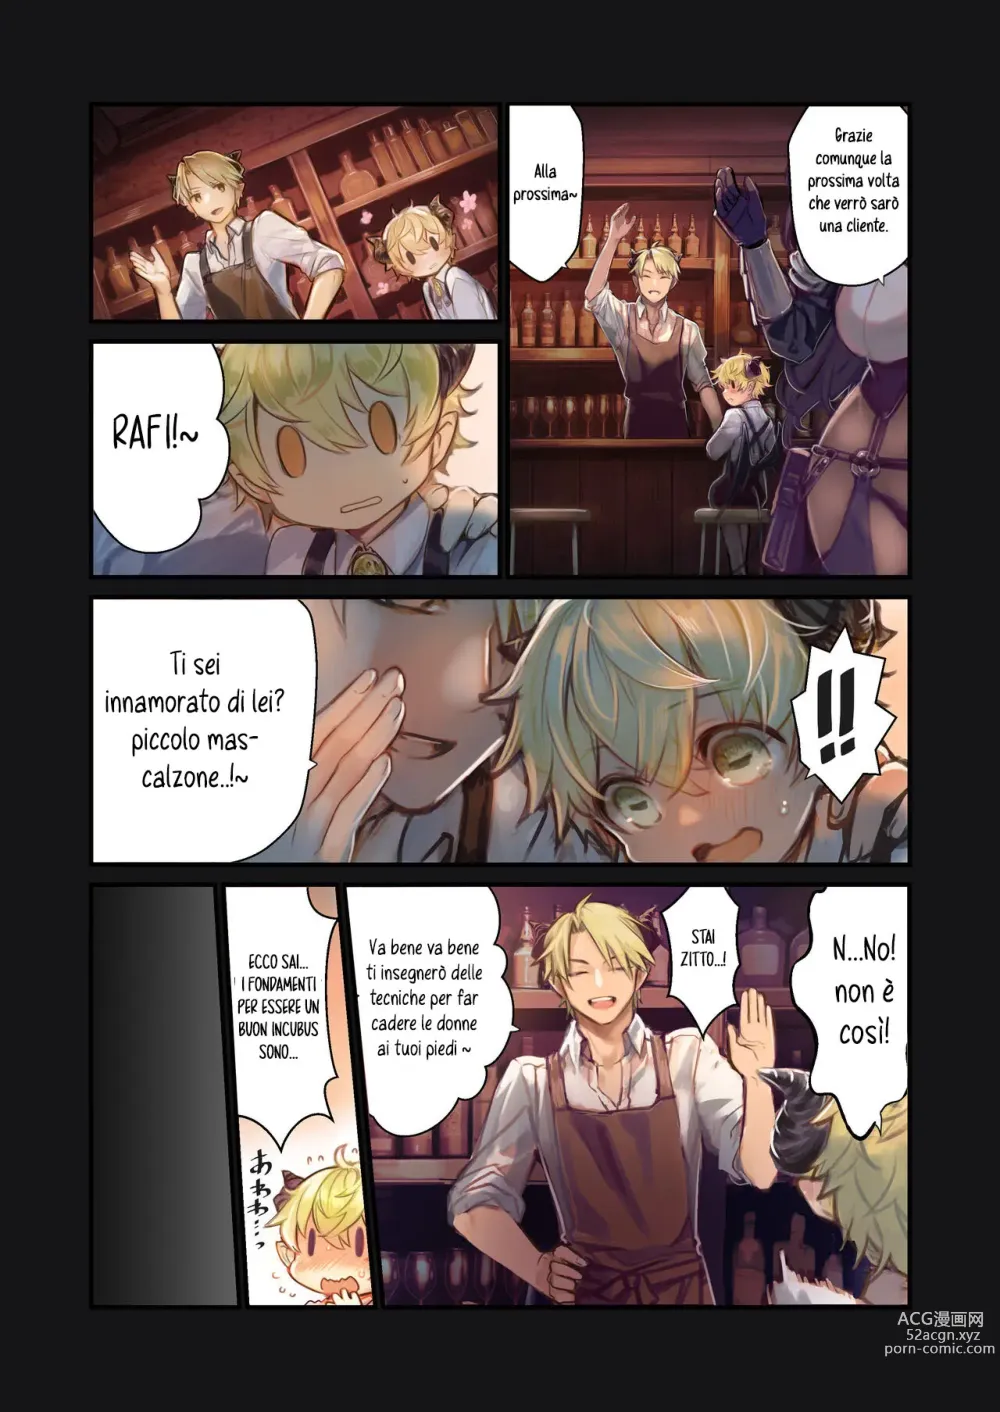 Page 9 of doujinshi MILK -A story About An Incubus Being Fondled By Two Onee-sans- (decensored)